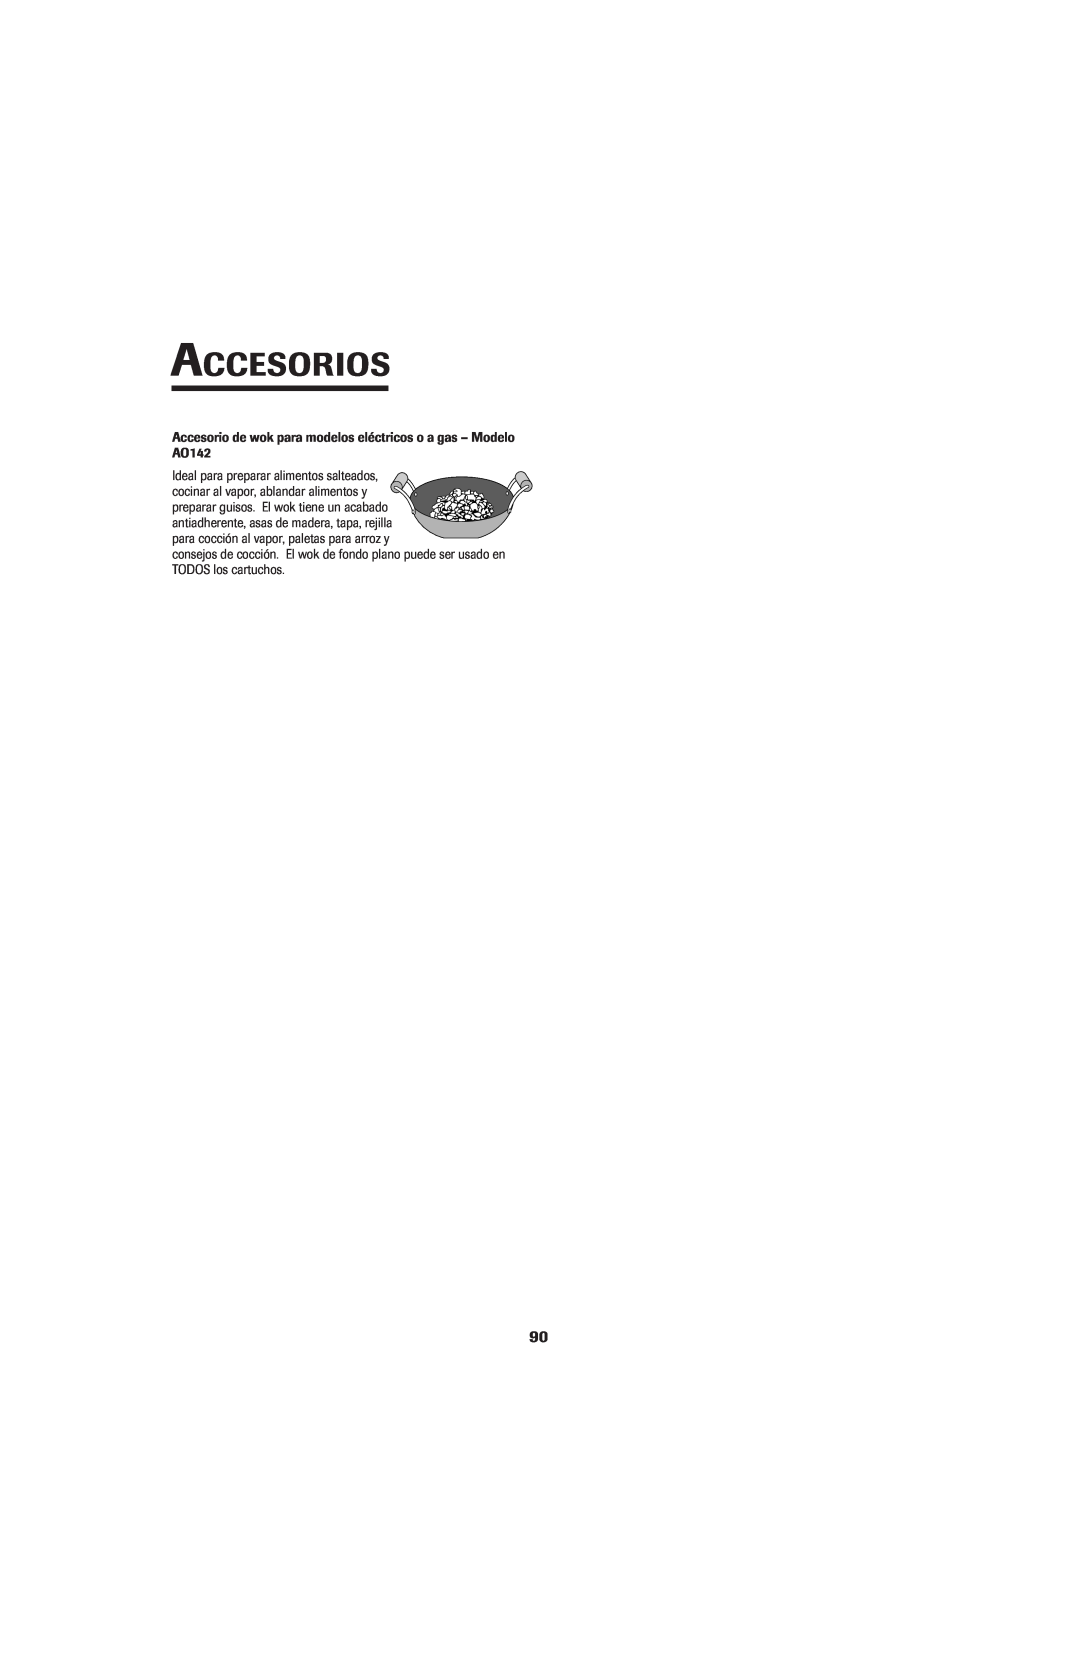 Jenn-Air 8113P757-60 important safety instructions Accesorios 